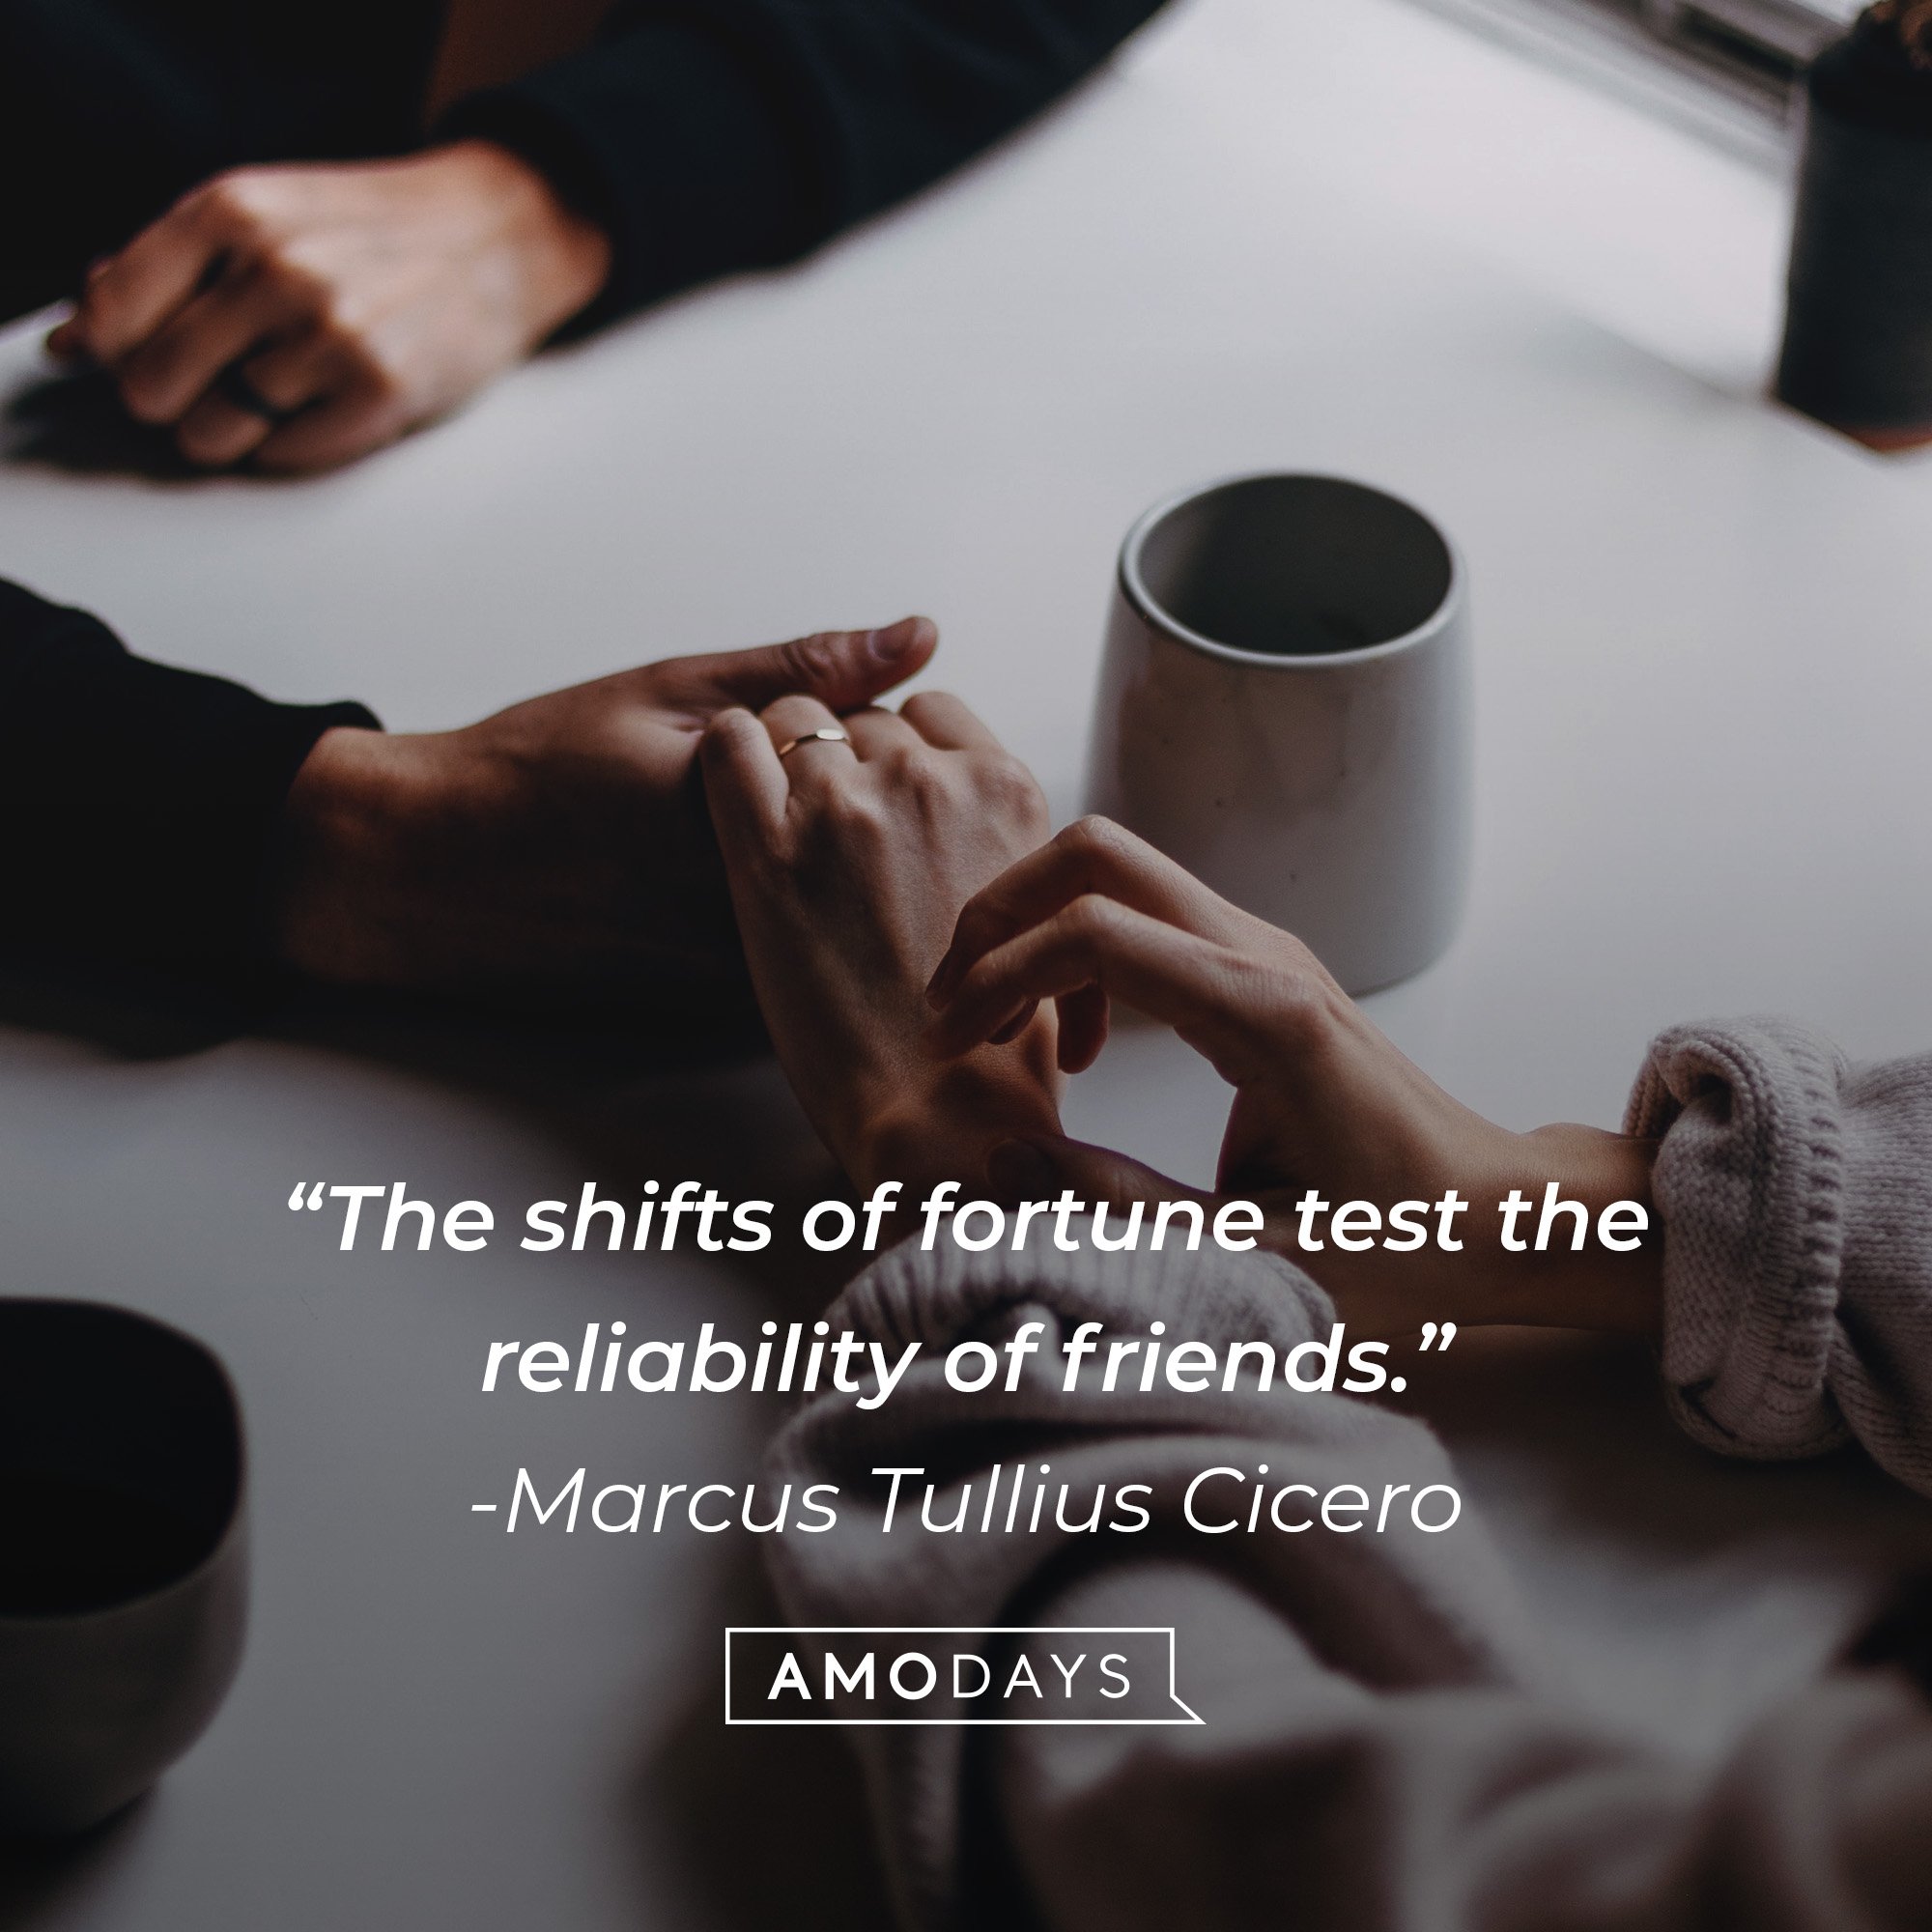 Marcus Tullius Cicero’s quote: “The shifts of fortune test the reliability of friends.” | Image: AmoDays 